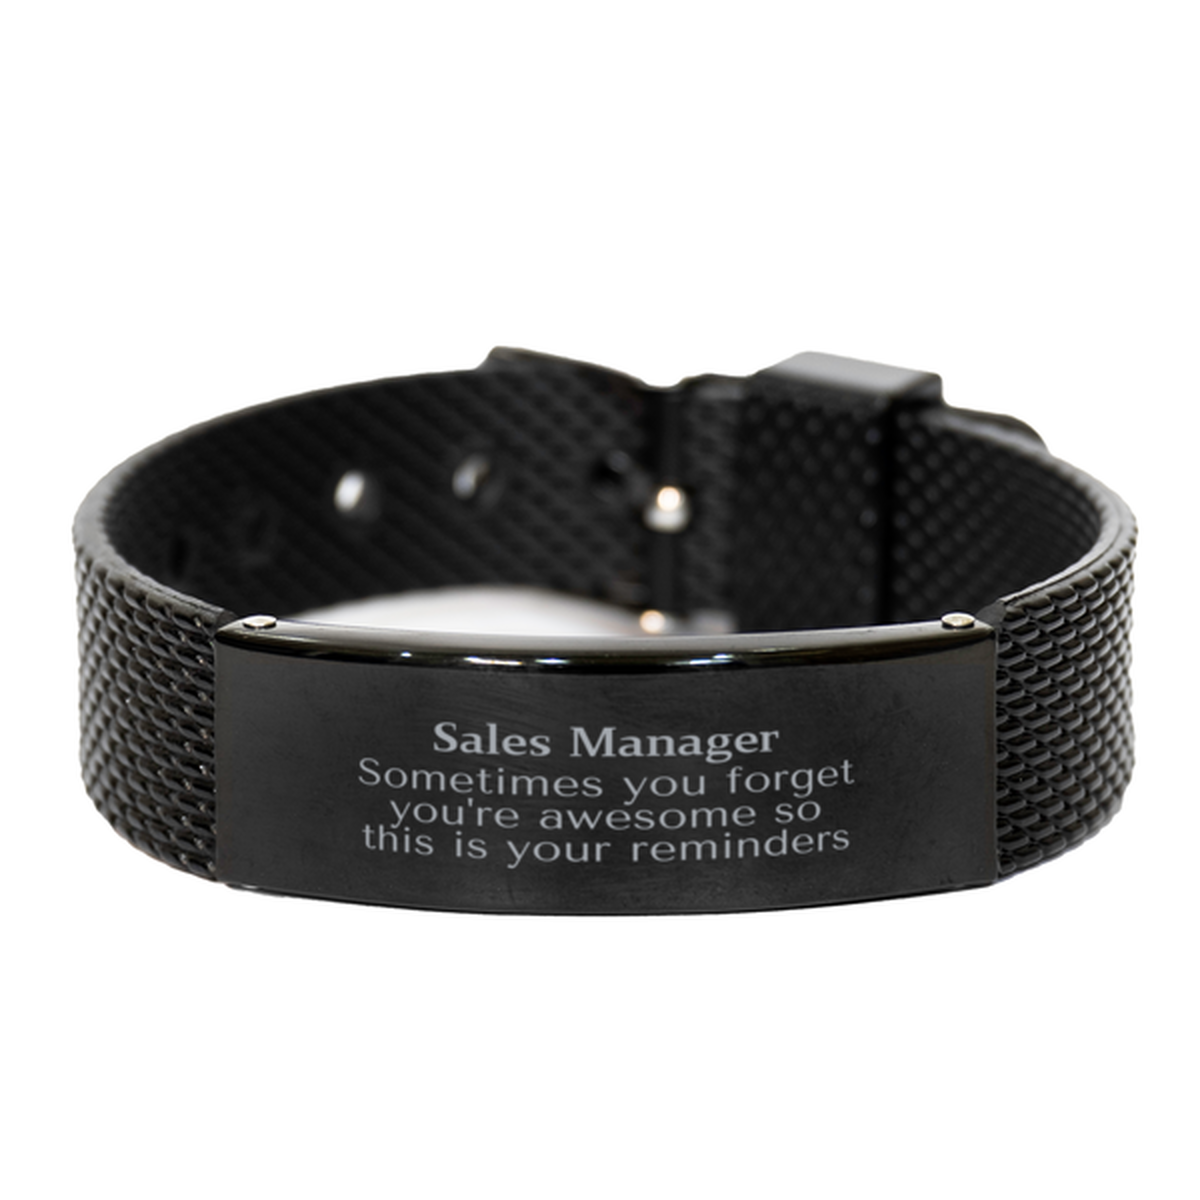 Sentimental Sales Manager Black Shark Mesh Bracelet, Sales Manager Sometimes you forget you're awesome so this is your reminders, Graduation Christmas Birthday Gifts for Sales Manager, Men, Women, Coworkers